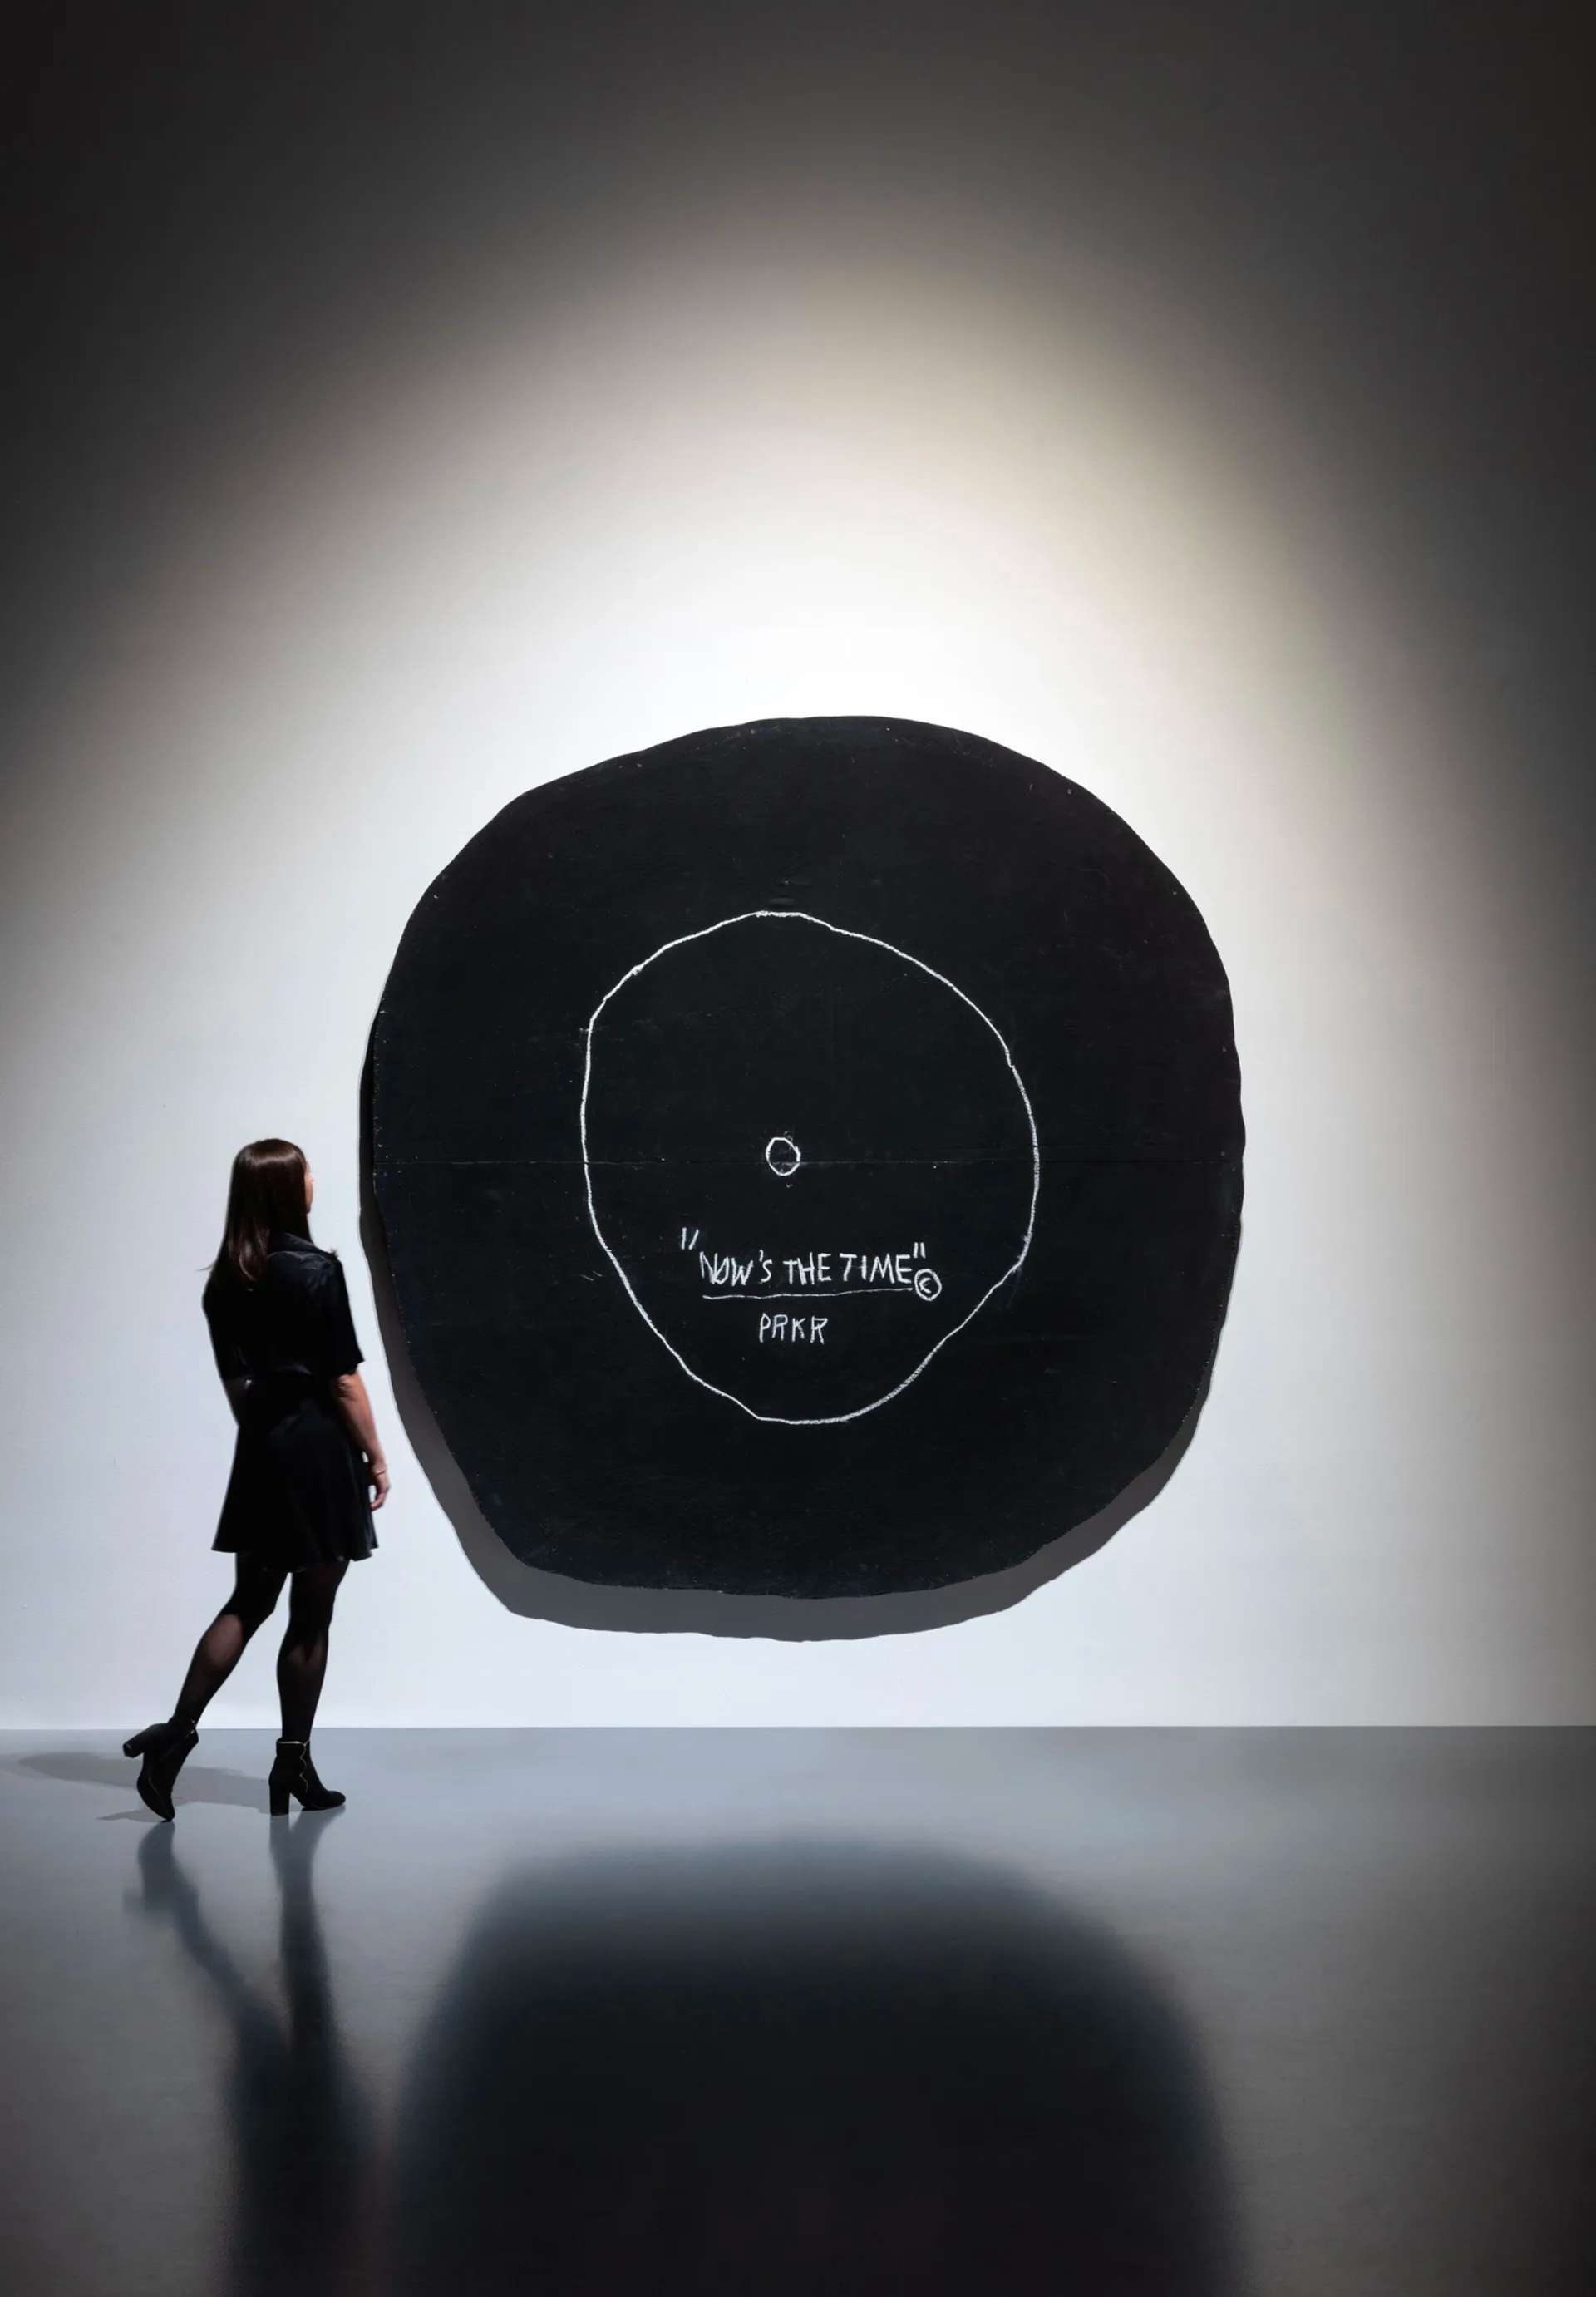 A woman standing beside and gazing at a large black rounded canvas resembling a record player. The artwork displays the phrase ”NOW'S THE TIME ©"